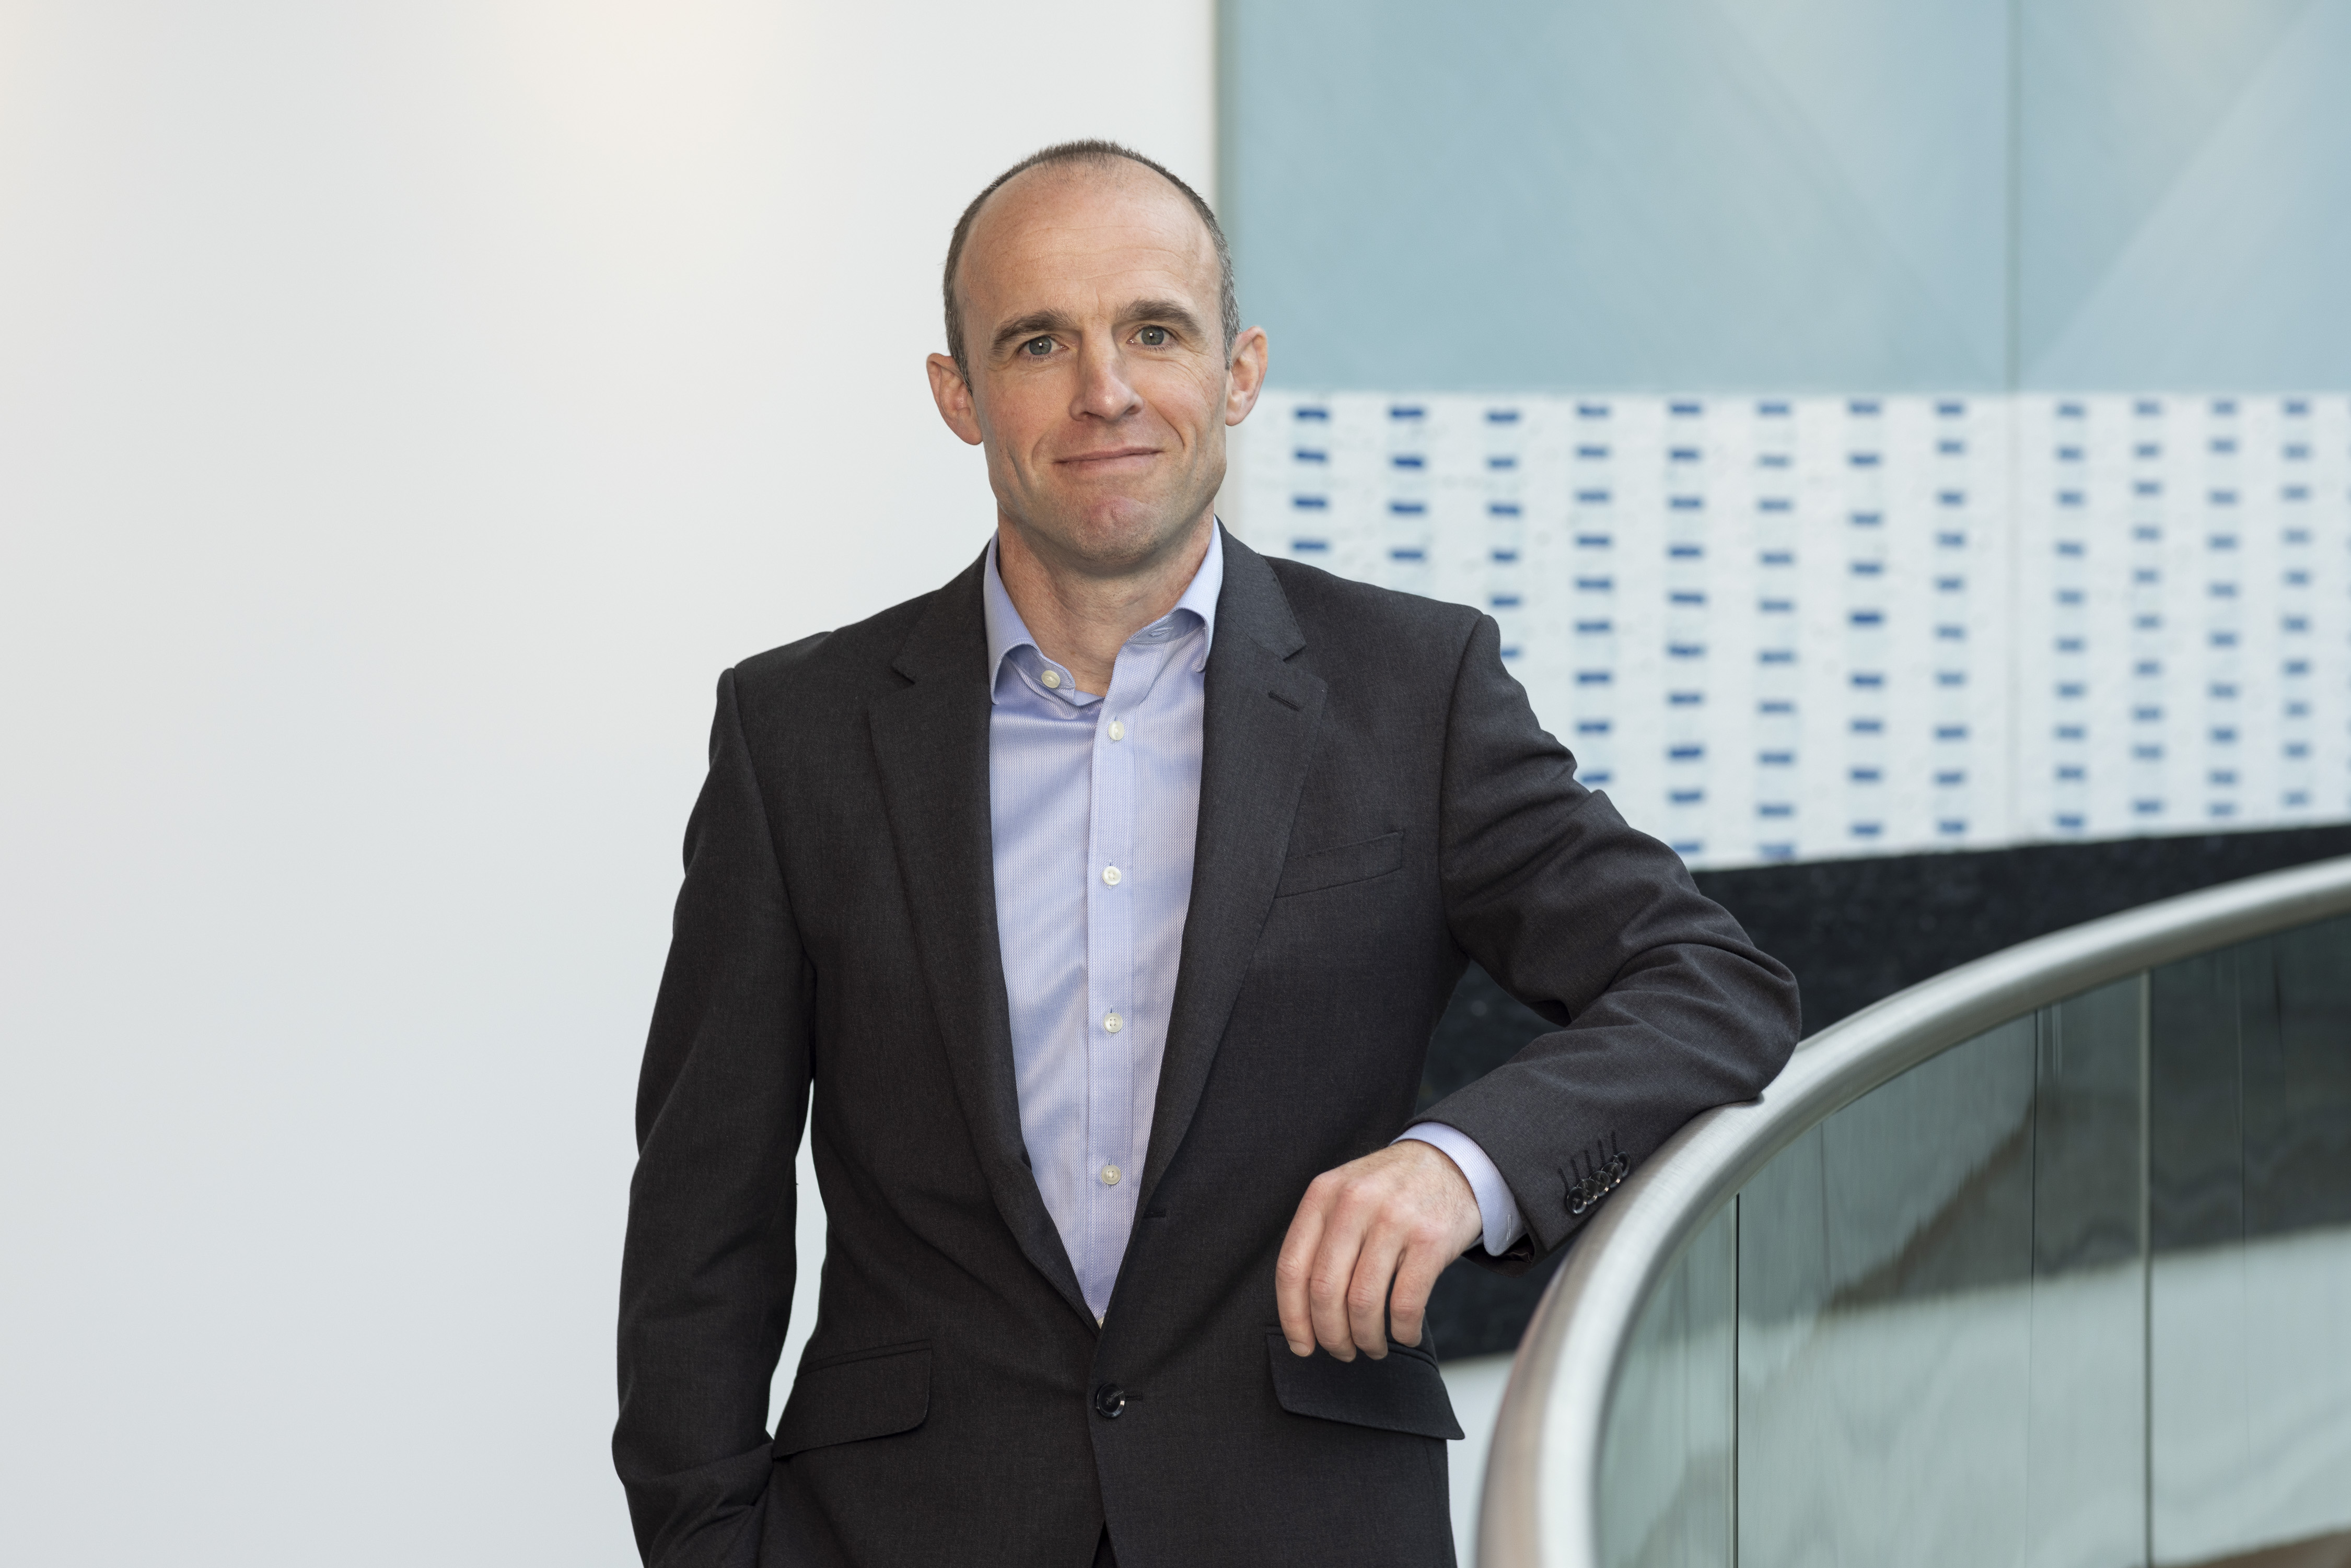 McCann FitzGerald appoints Adam Finlay as head of technology and innovation